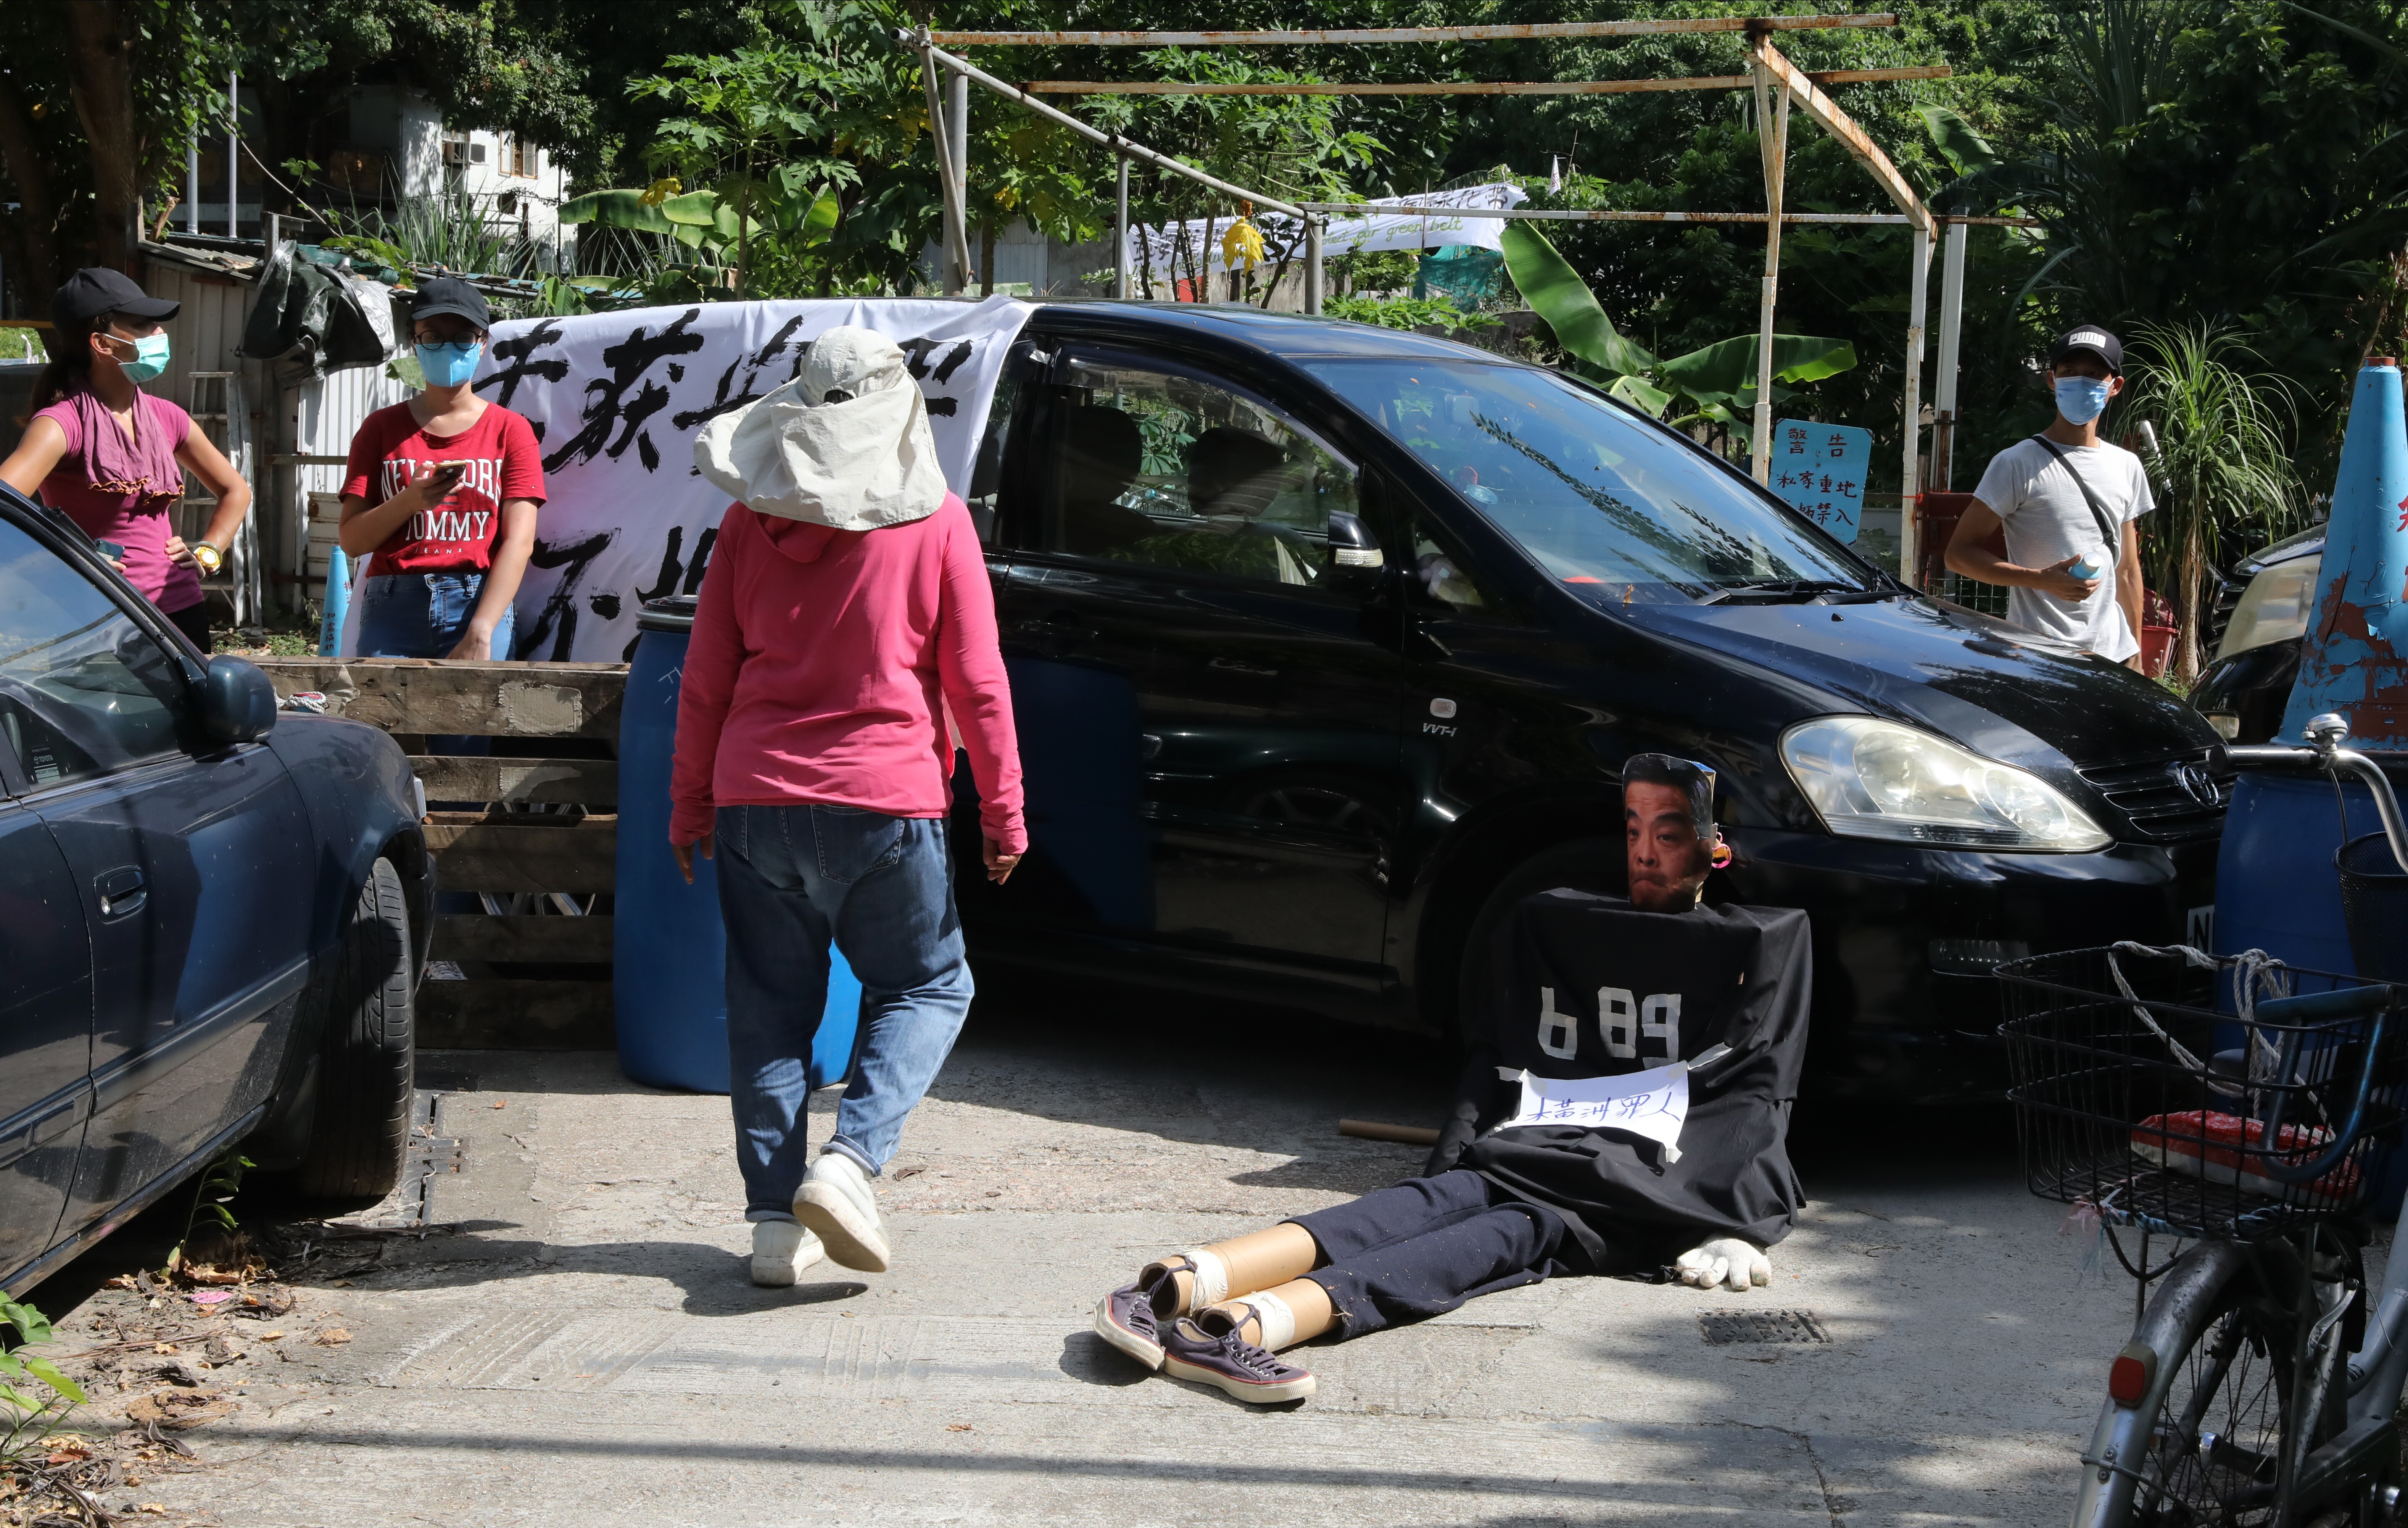 Villagers protesting against the eviction from their homes in Wang Chau. Photo: K. Y. Cheng